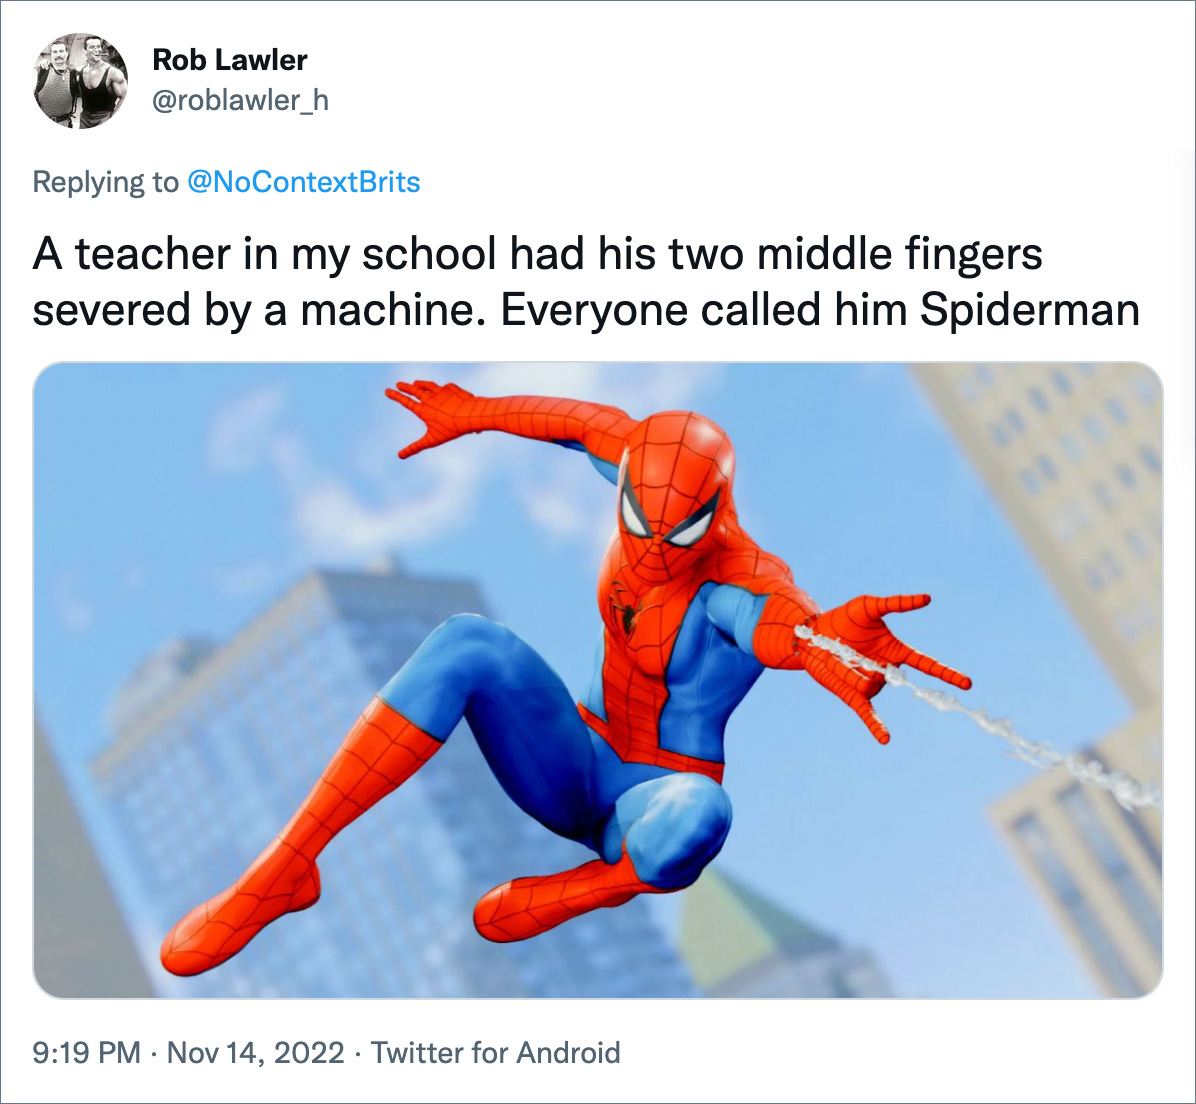 A teacher in my school had his two middle fingers severed by a machine. Everyone called him Spiderman